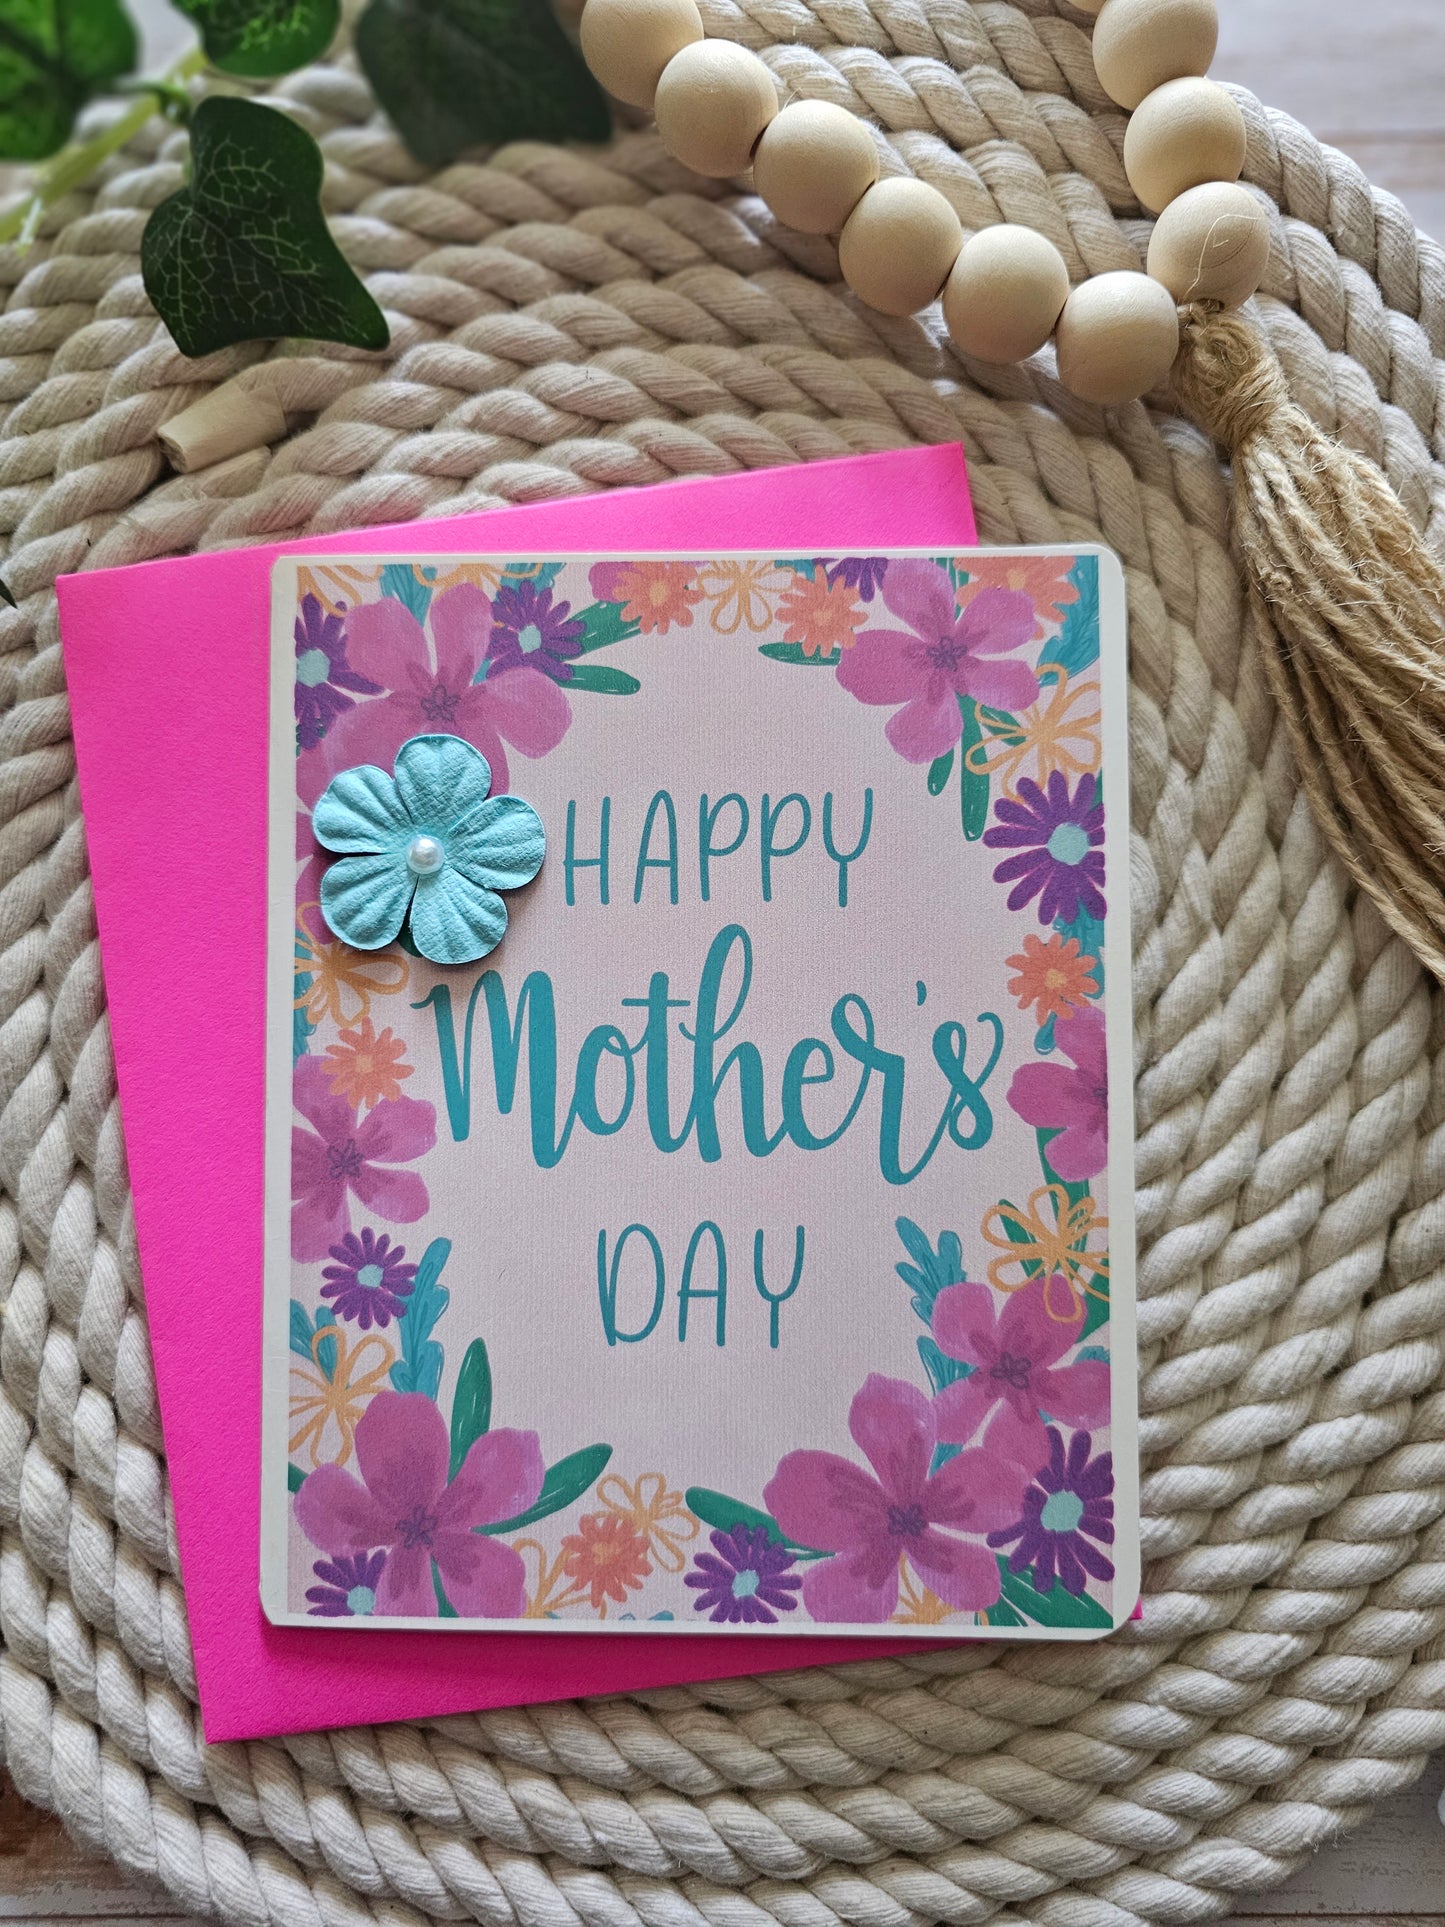 Happy Mother's Day Card with Flower